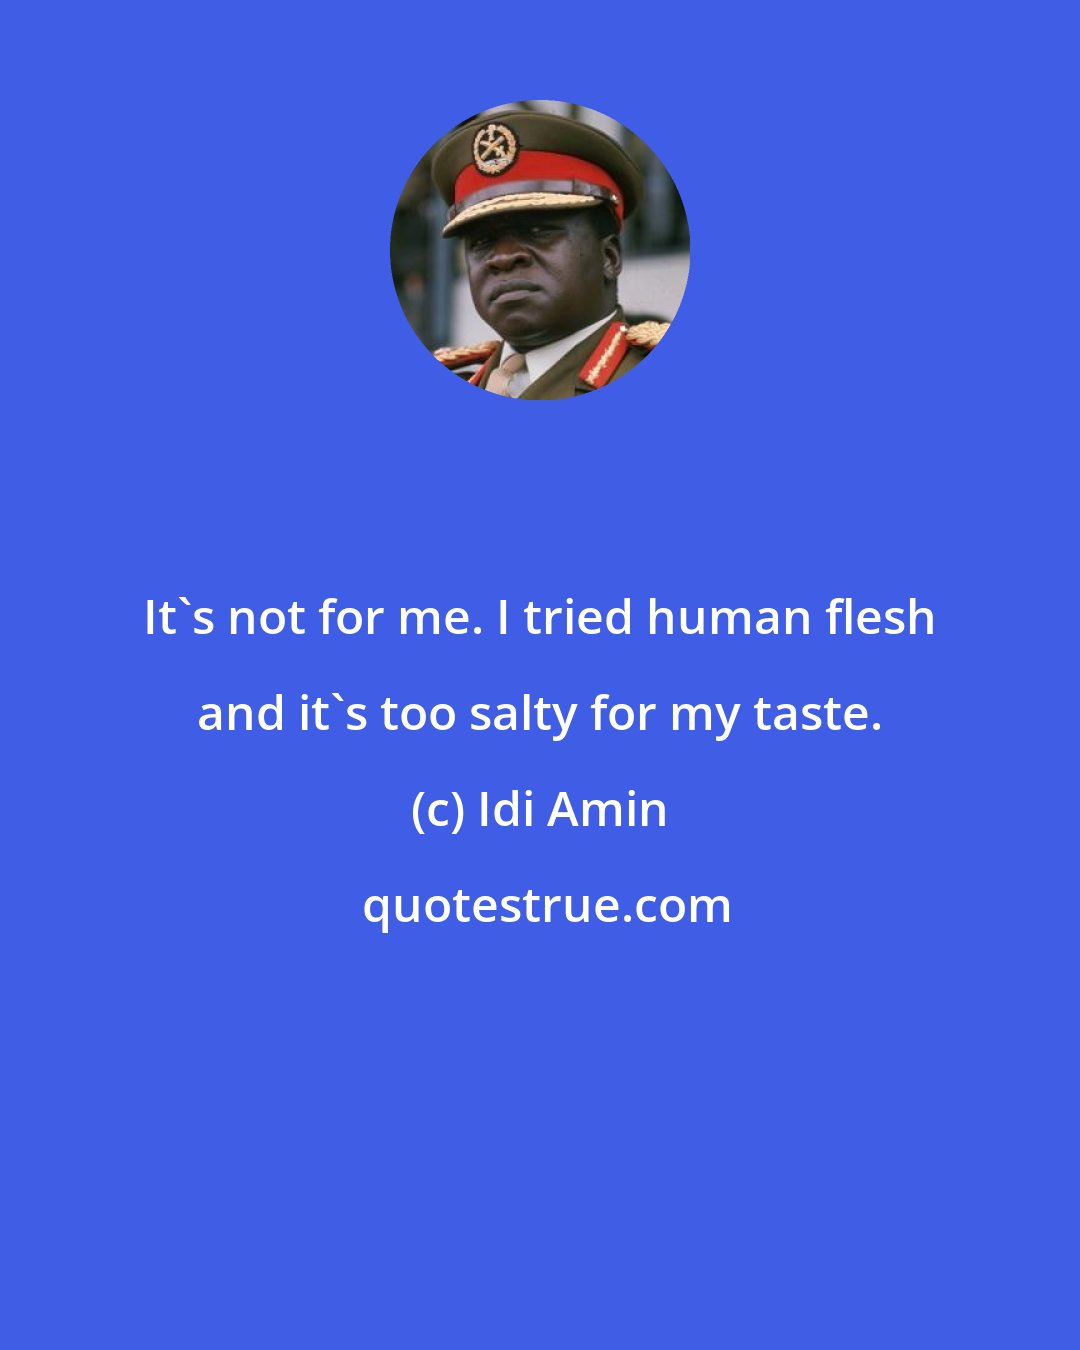 Idi Amin: It's not for me. I tried human flesh and it's too salty for my taste.